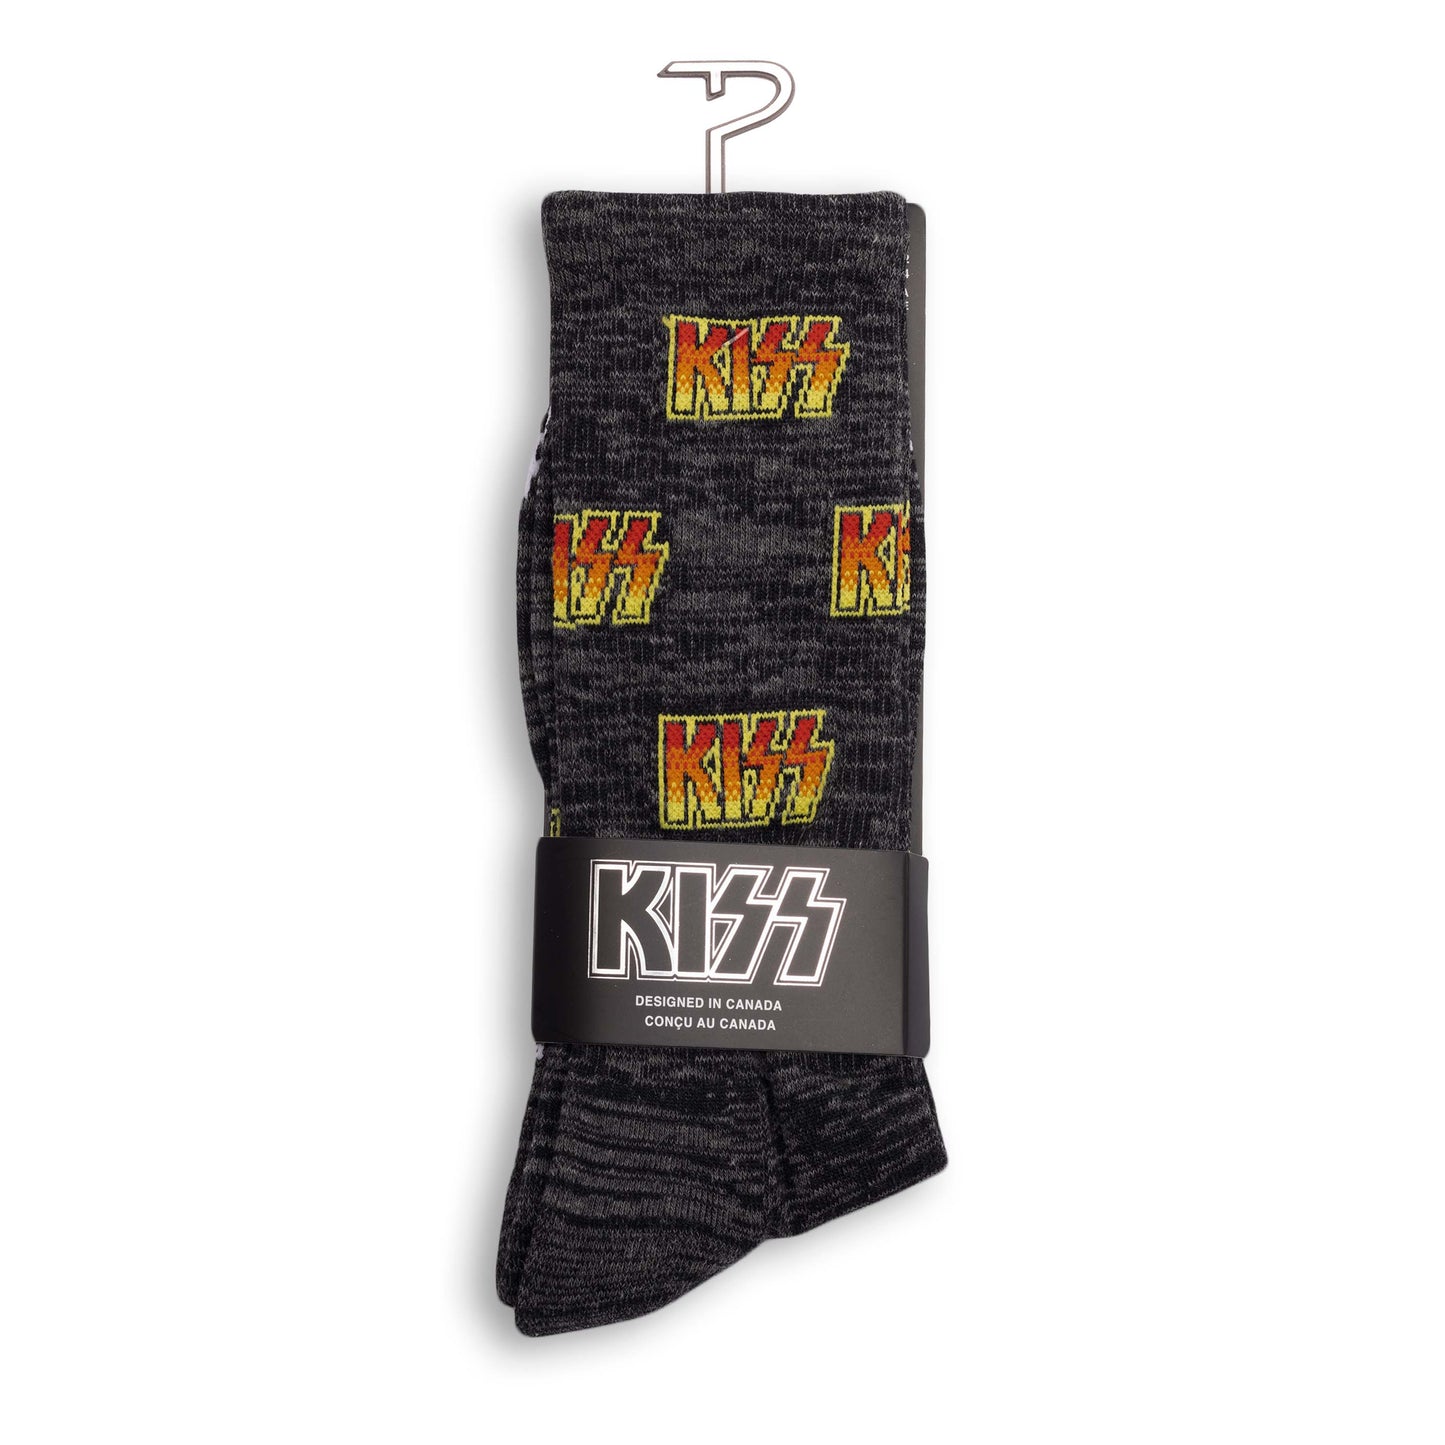 KISS® crew socks - Logo 1 pair  Wear the ultimate functional and fun footwear with these official KISS® socks.